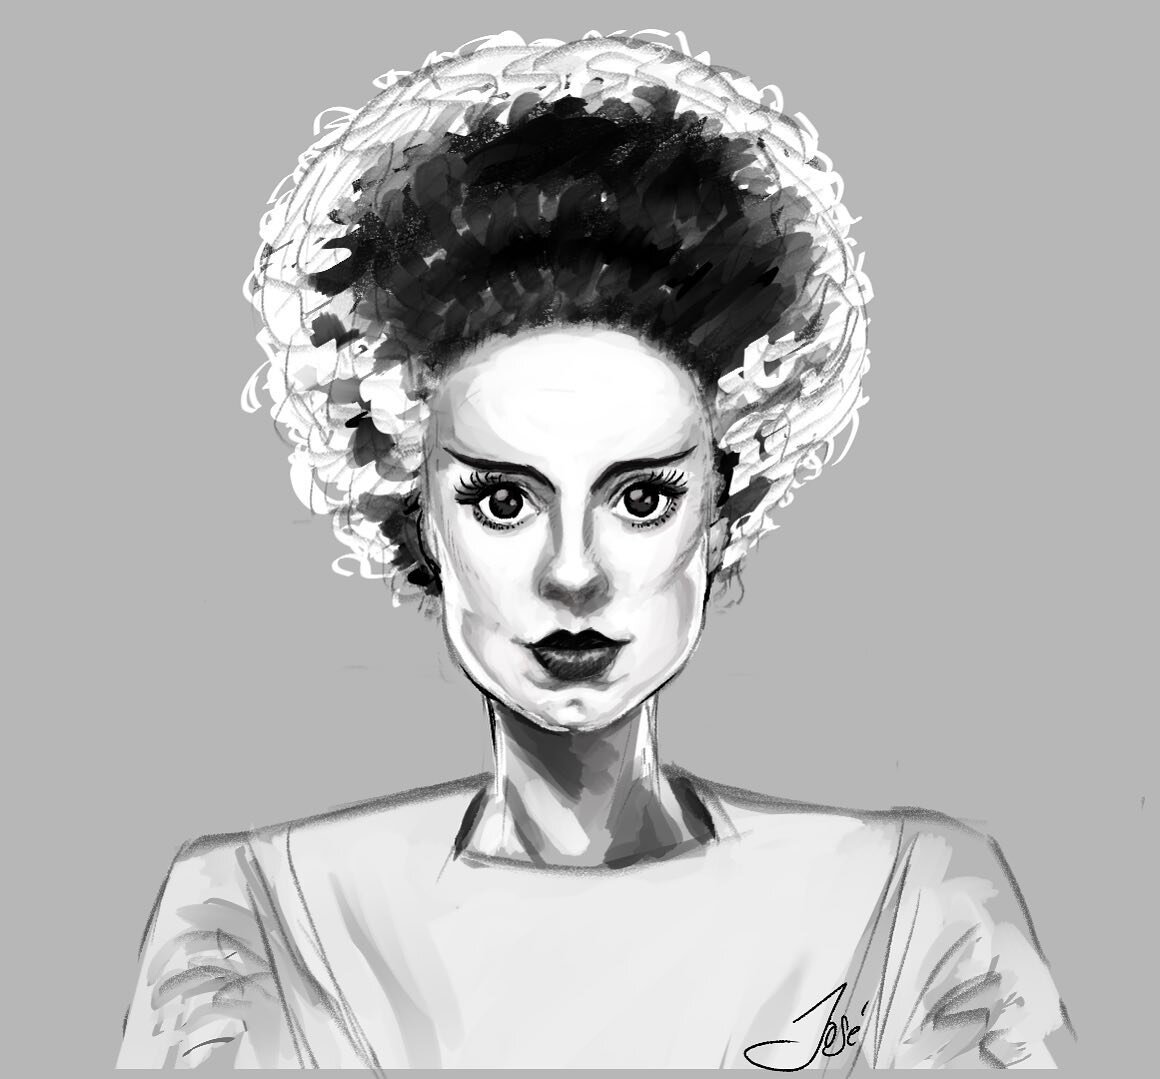 Elsa Lanchester had striking features. An incredible pick for Frankie&rsquo;s wife.
It was great doing a study on this beautiful woman she&rsquo;s definitely on my top ladies of horror.
#monochromeart #ladiesofhorror